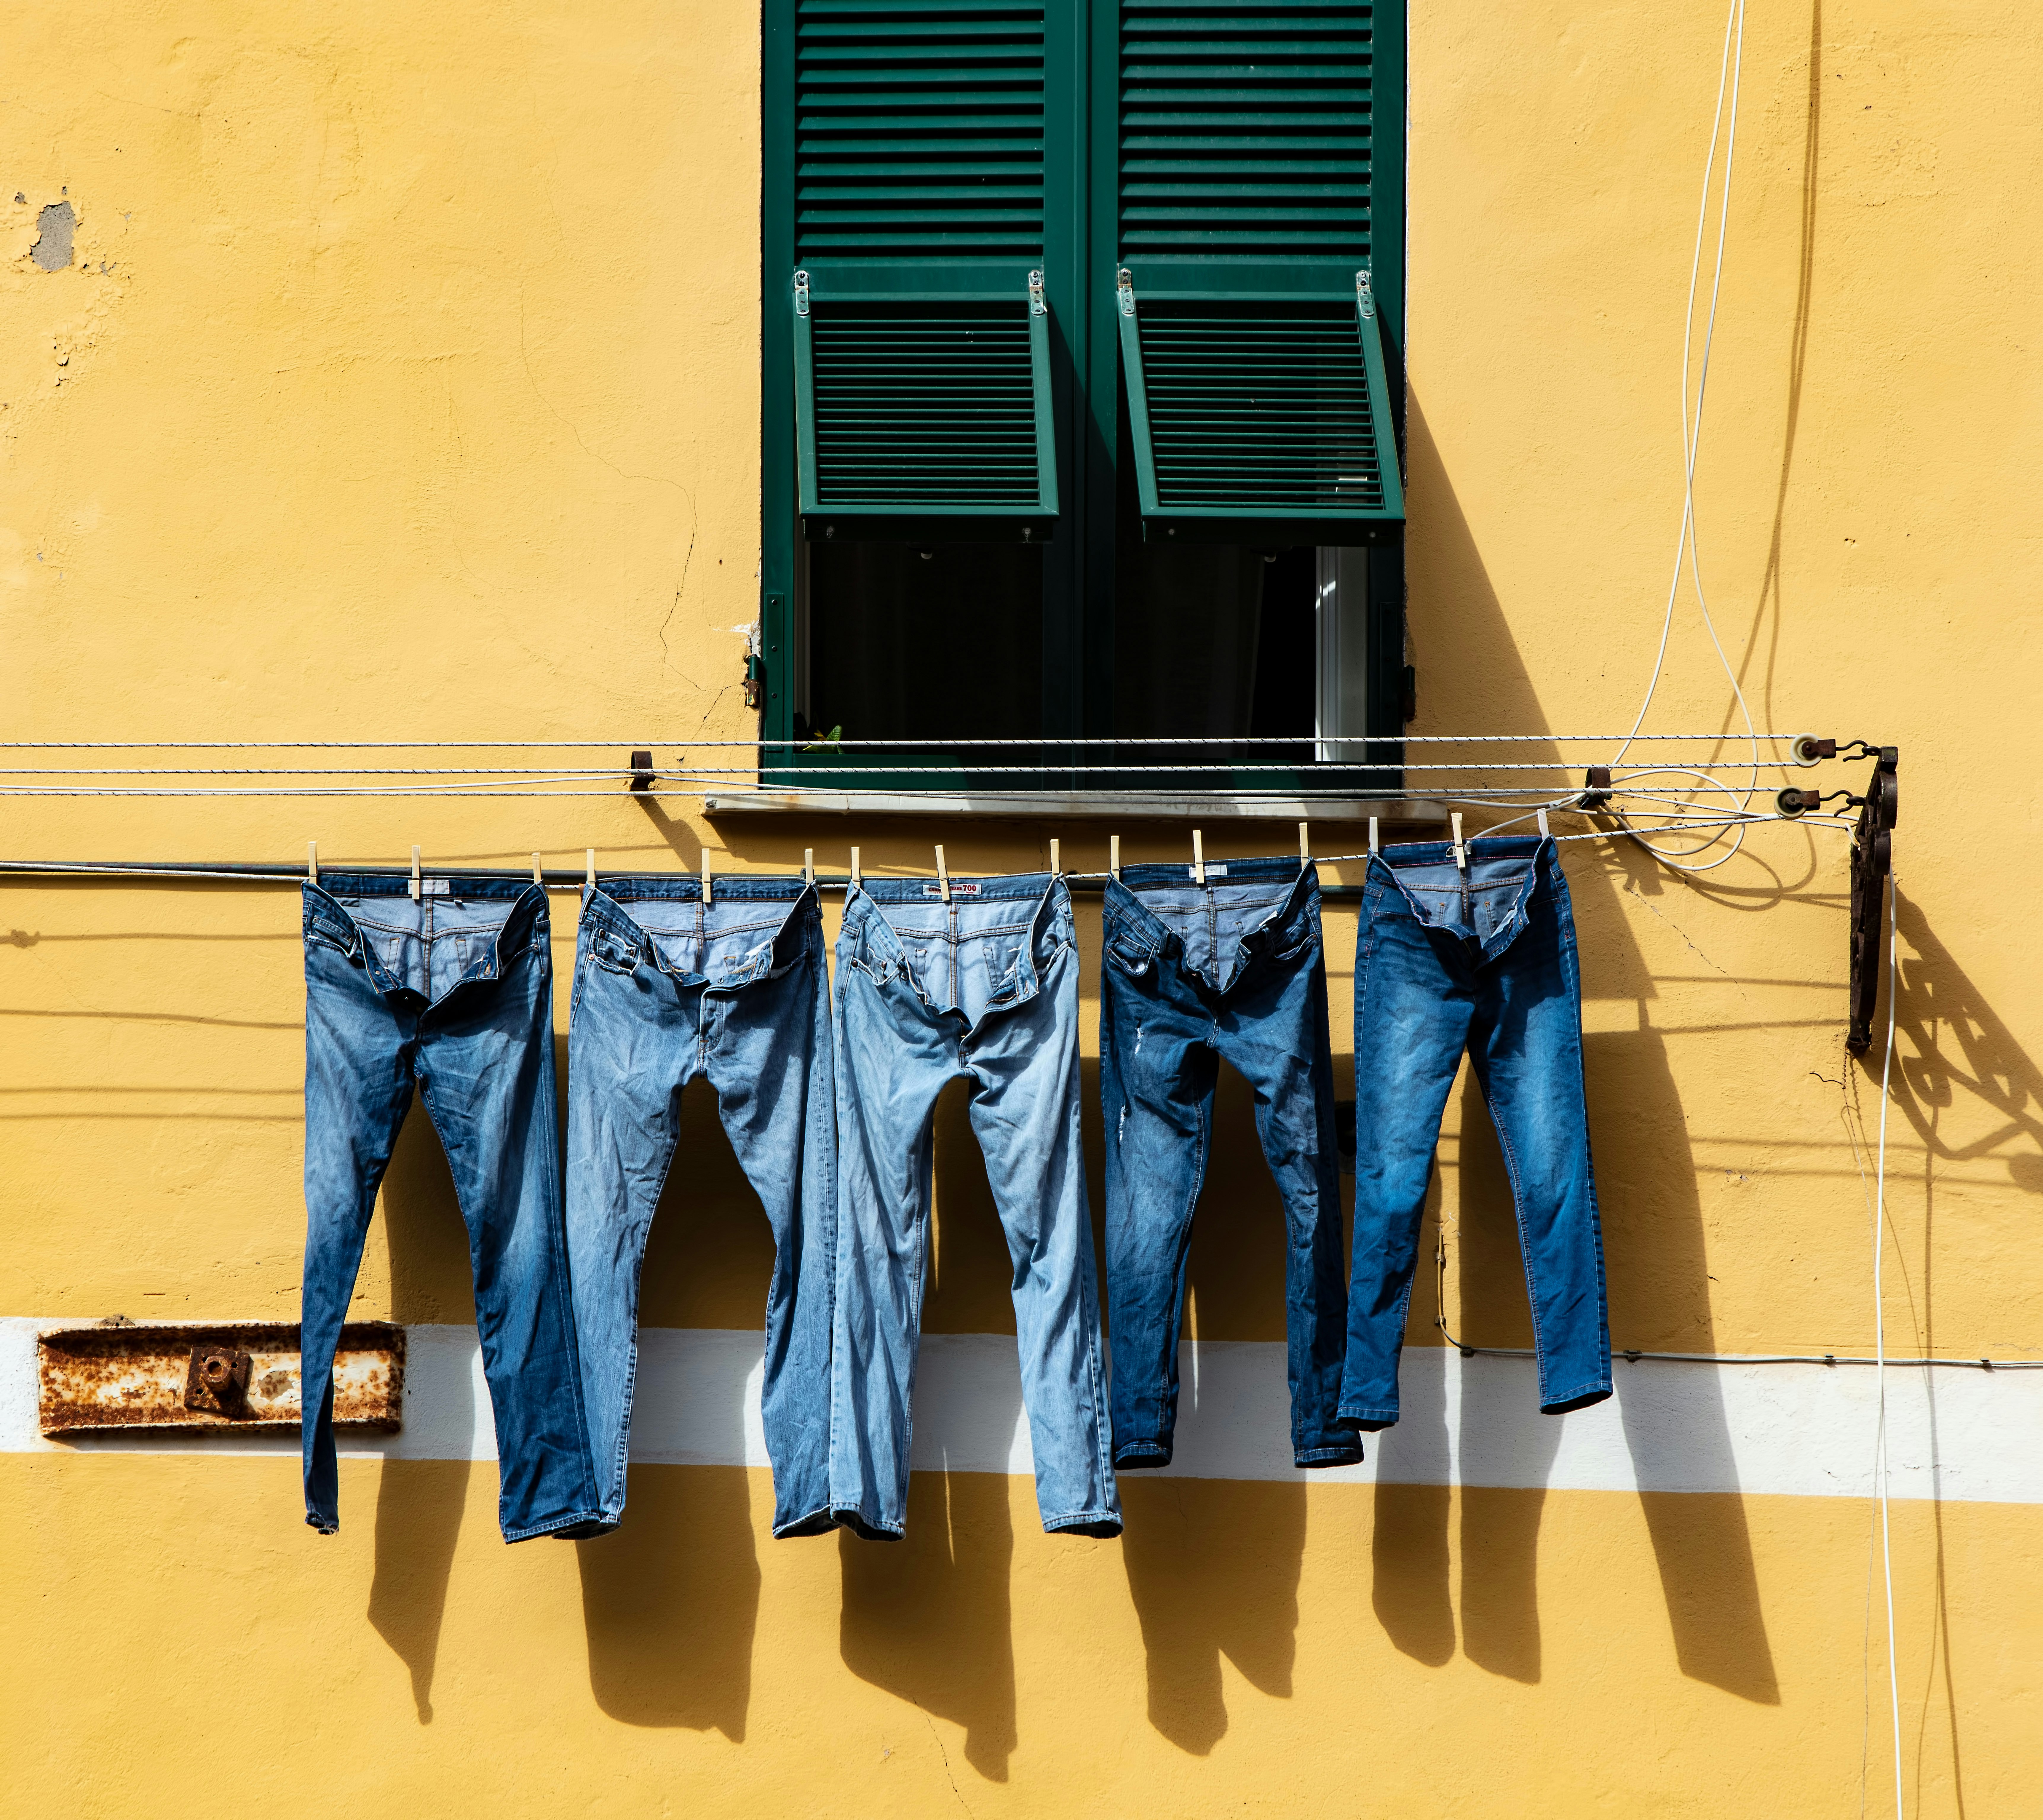 five blue denim jeans hanged on grey cable near window